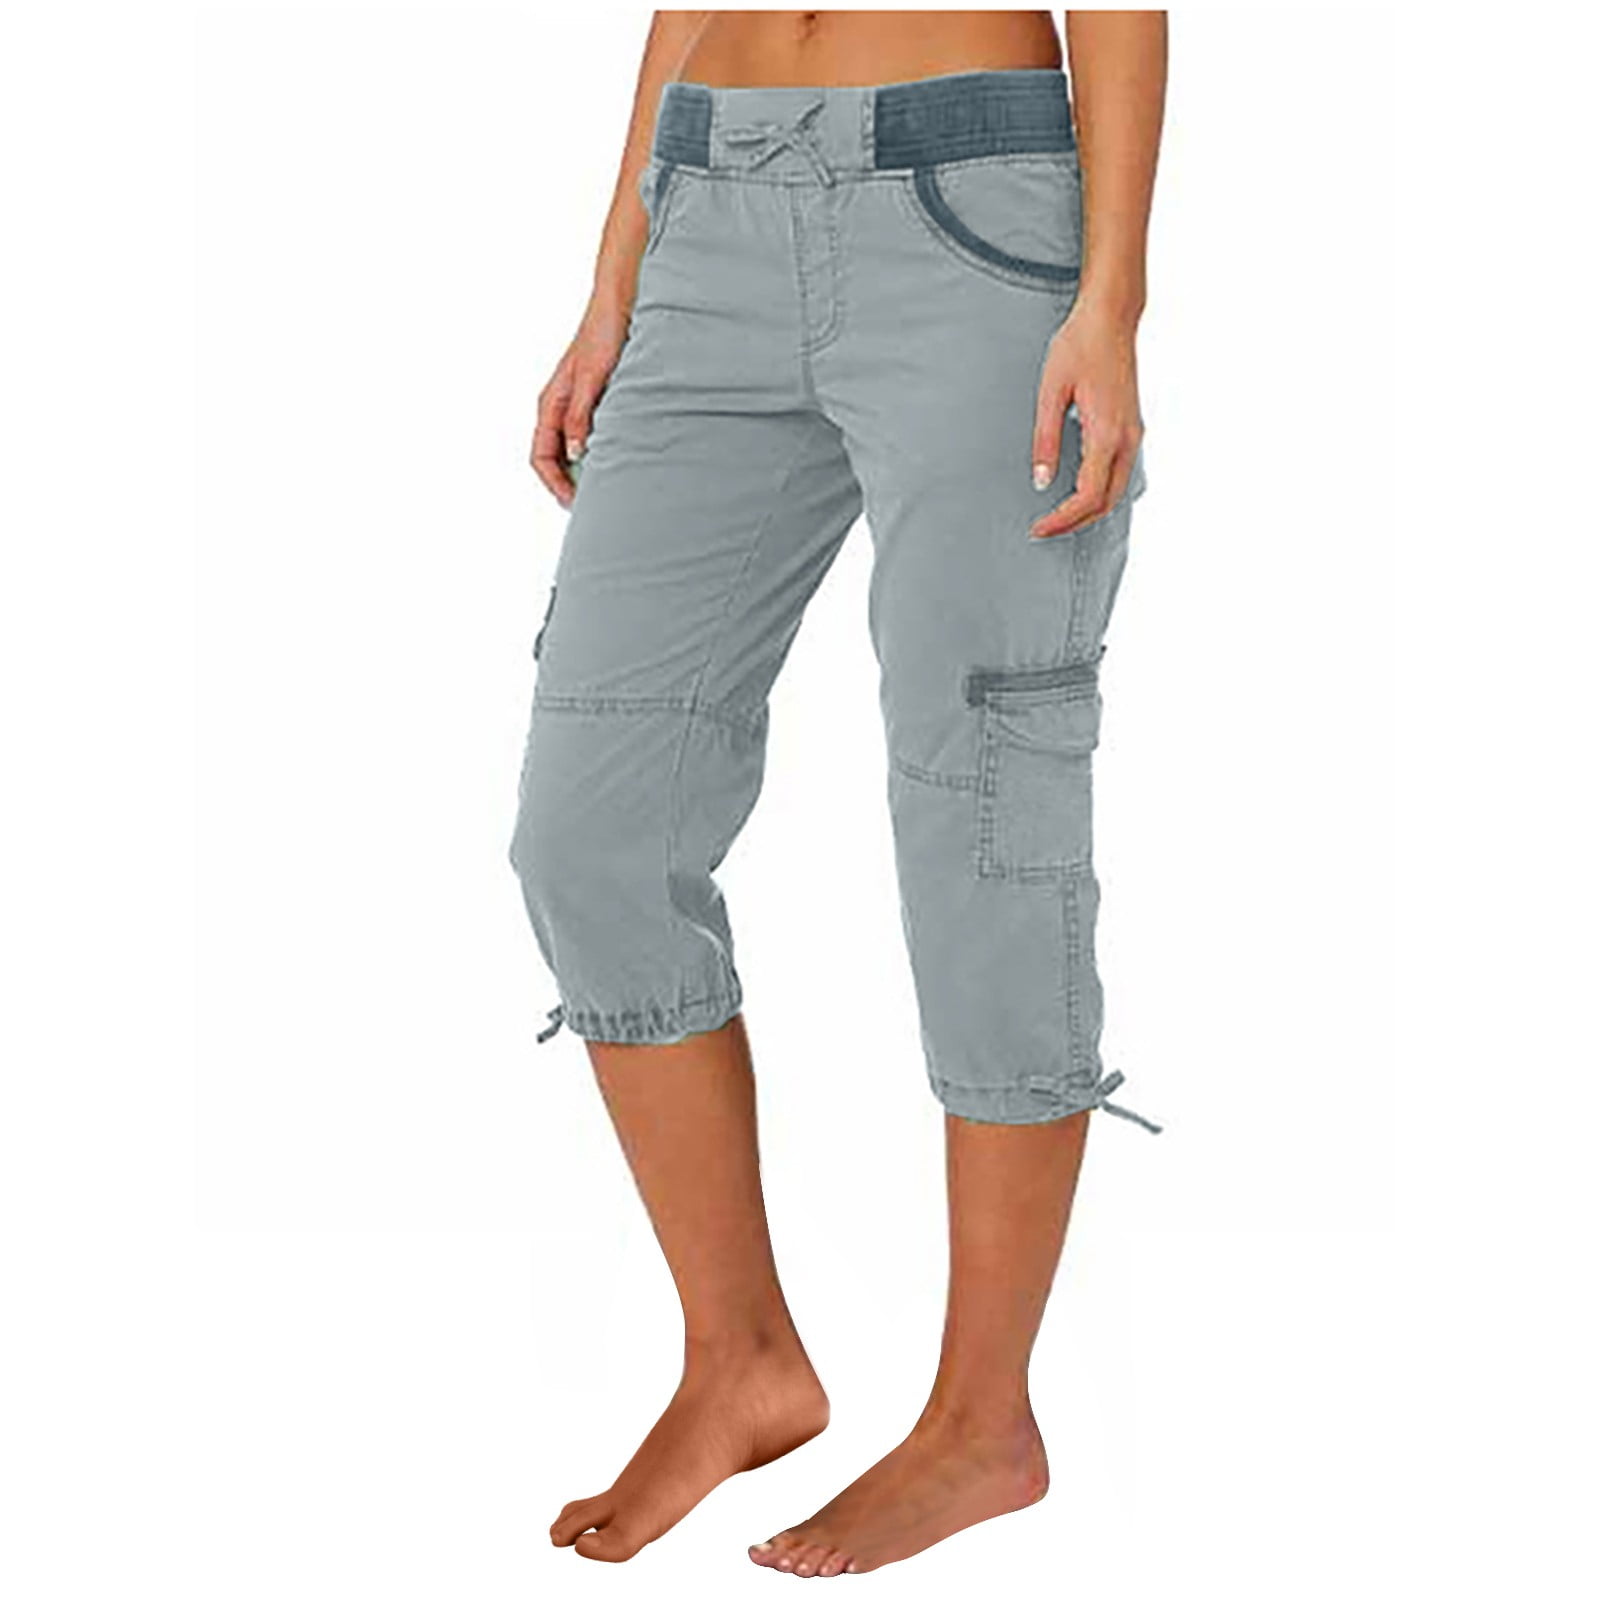 Ernkv Women's Capri Cargo Pants with Pocket Summer Clearance